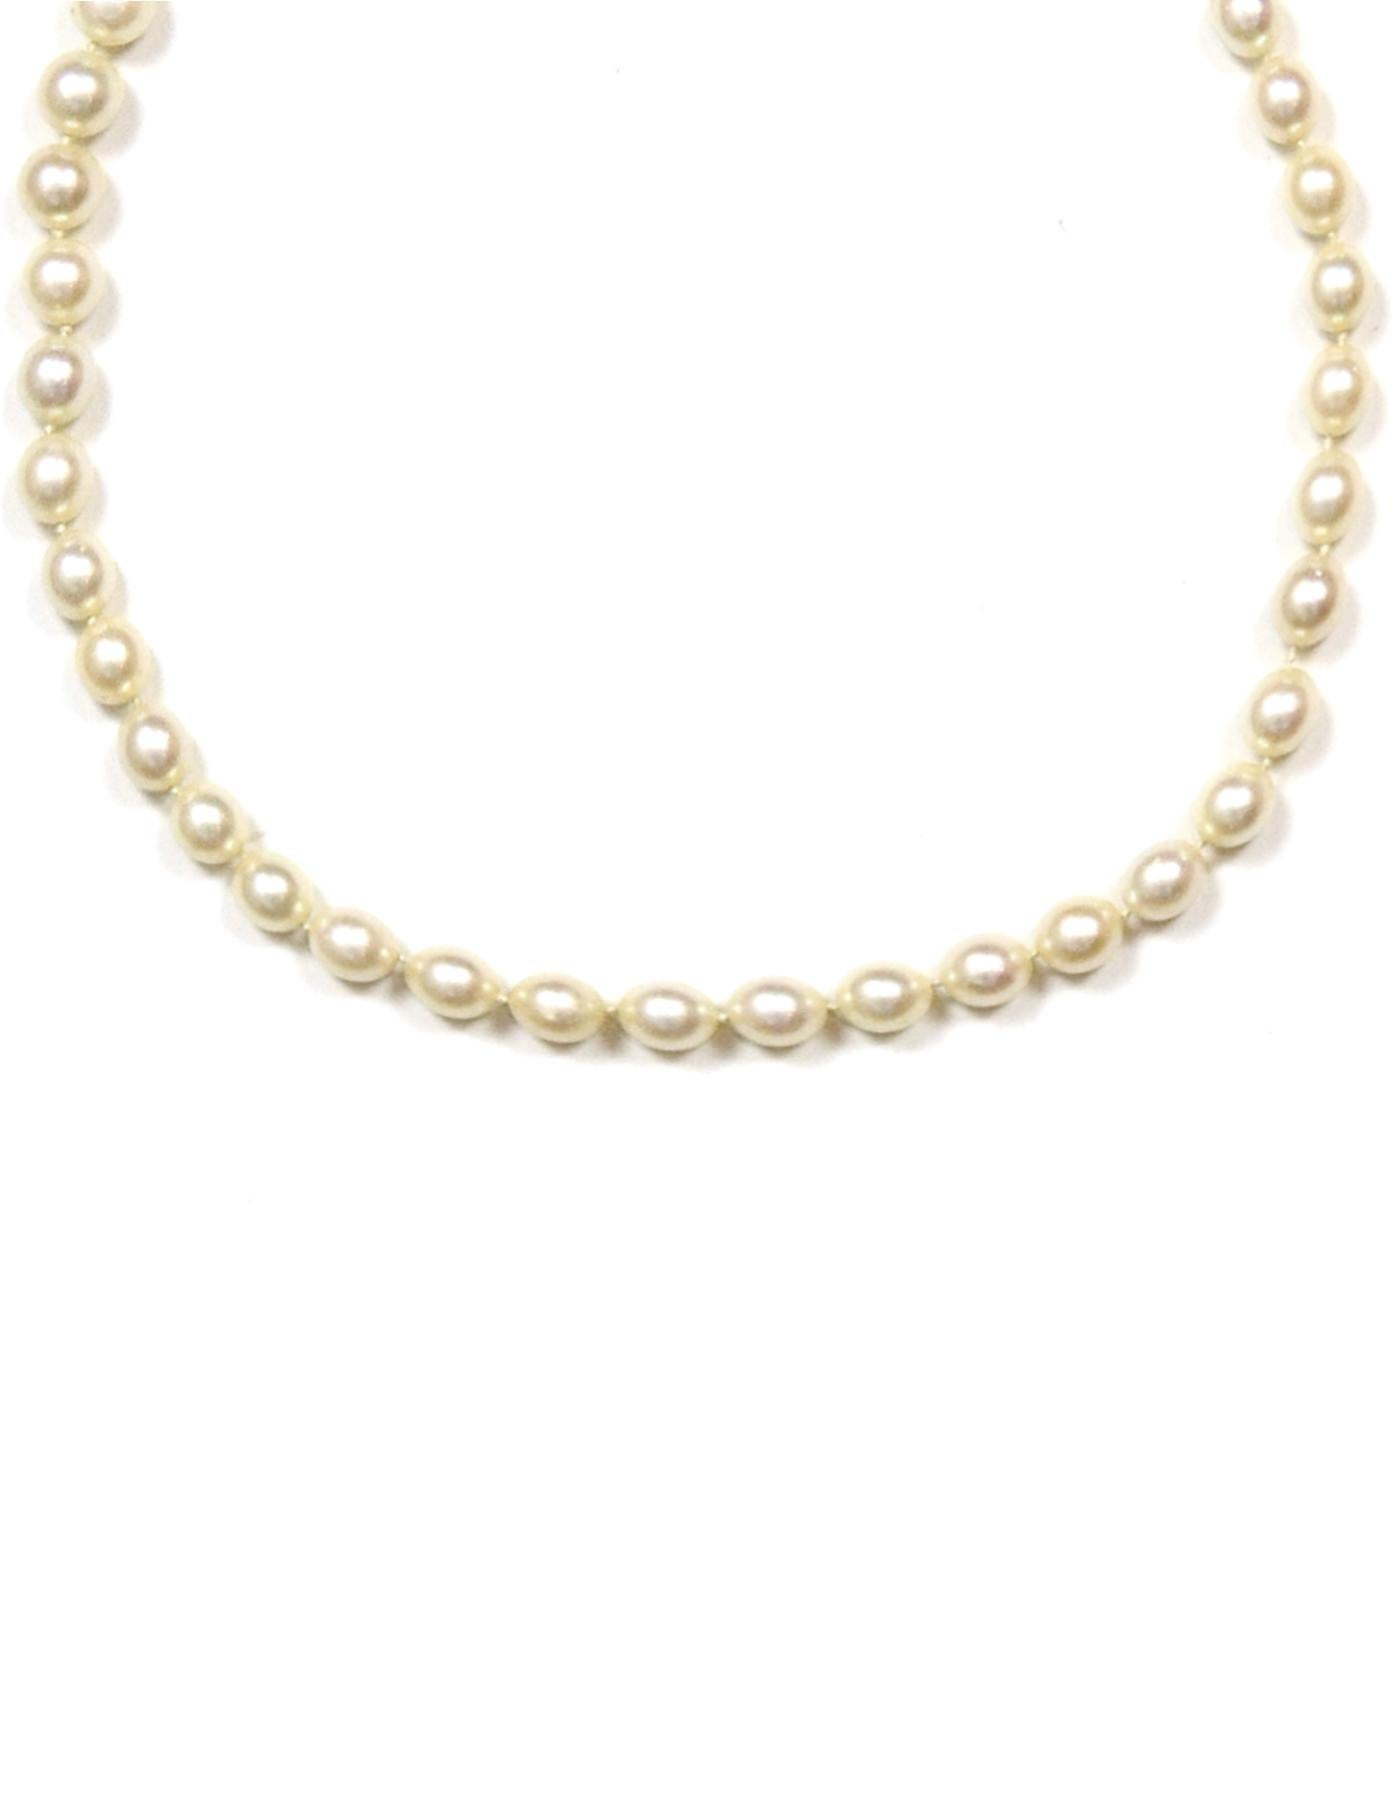 14k Gold and Cultured Pearl Necklace with Opal Pendant 

Unknown origins
Color: Gold
Materials: 14k Gold, Opal, Pearl
Hallmarks: 